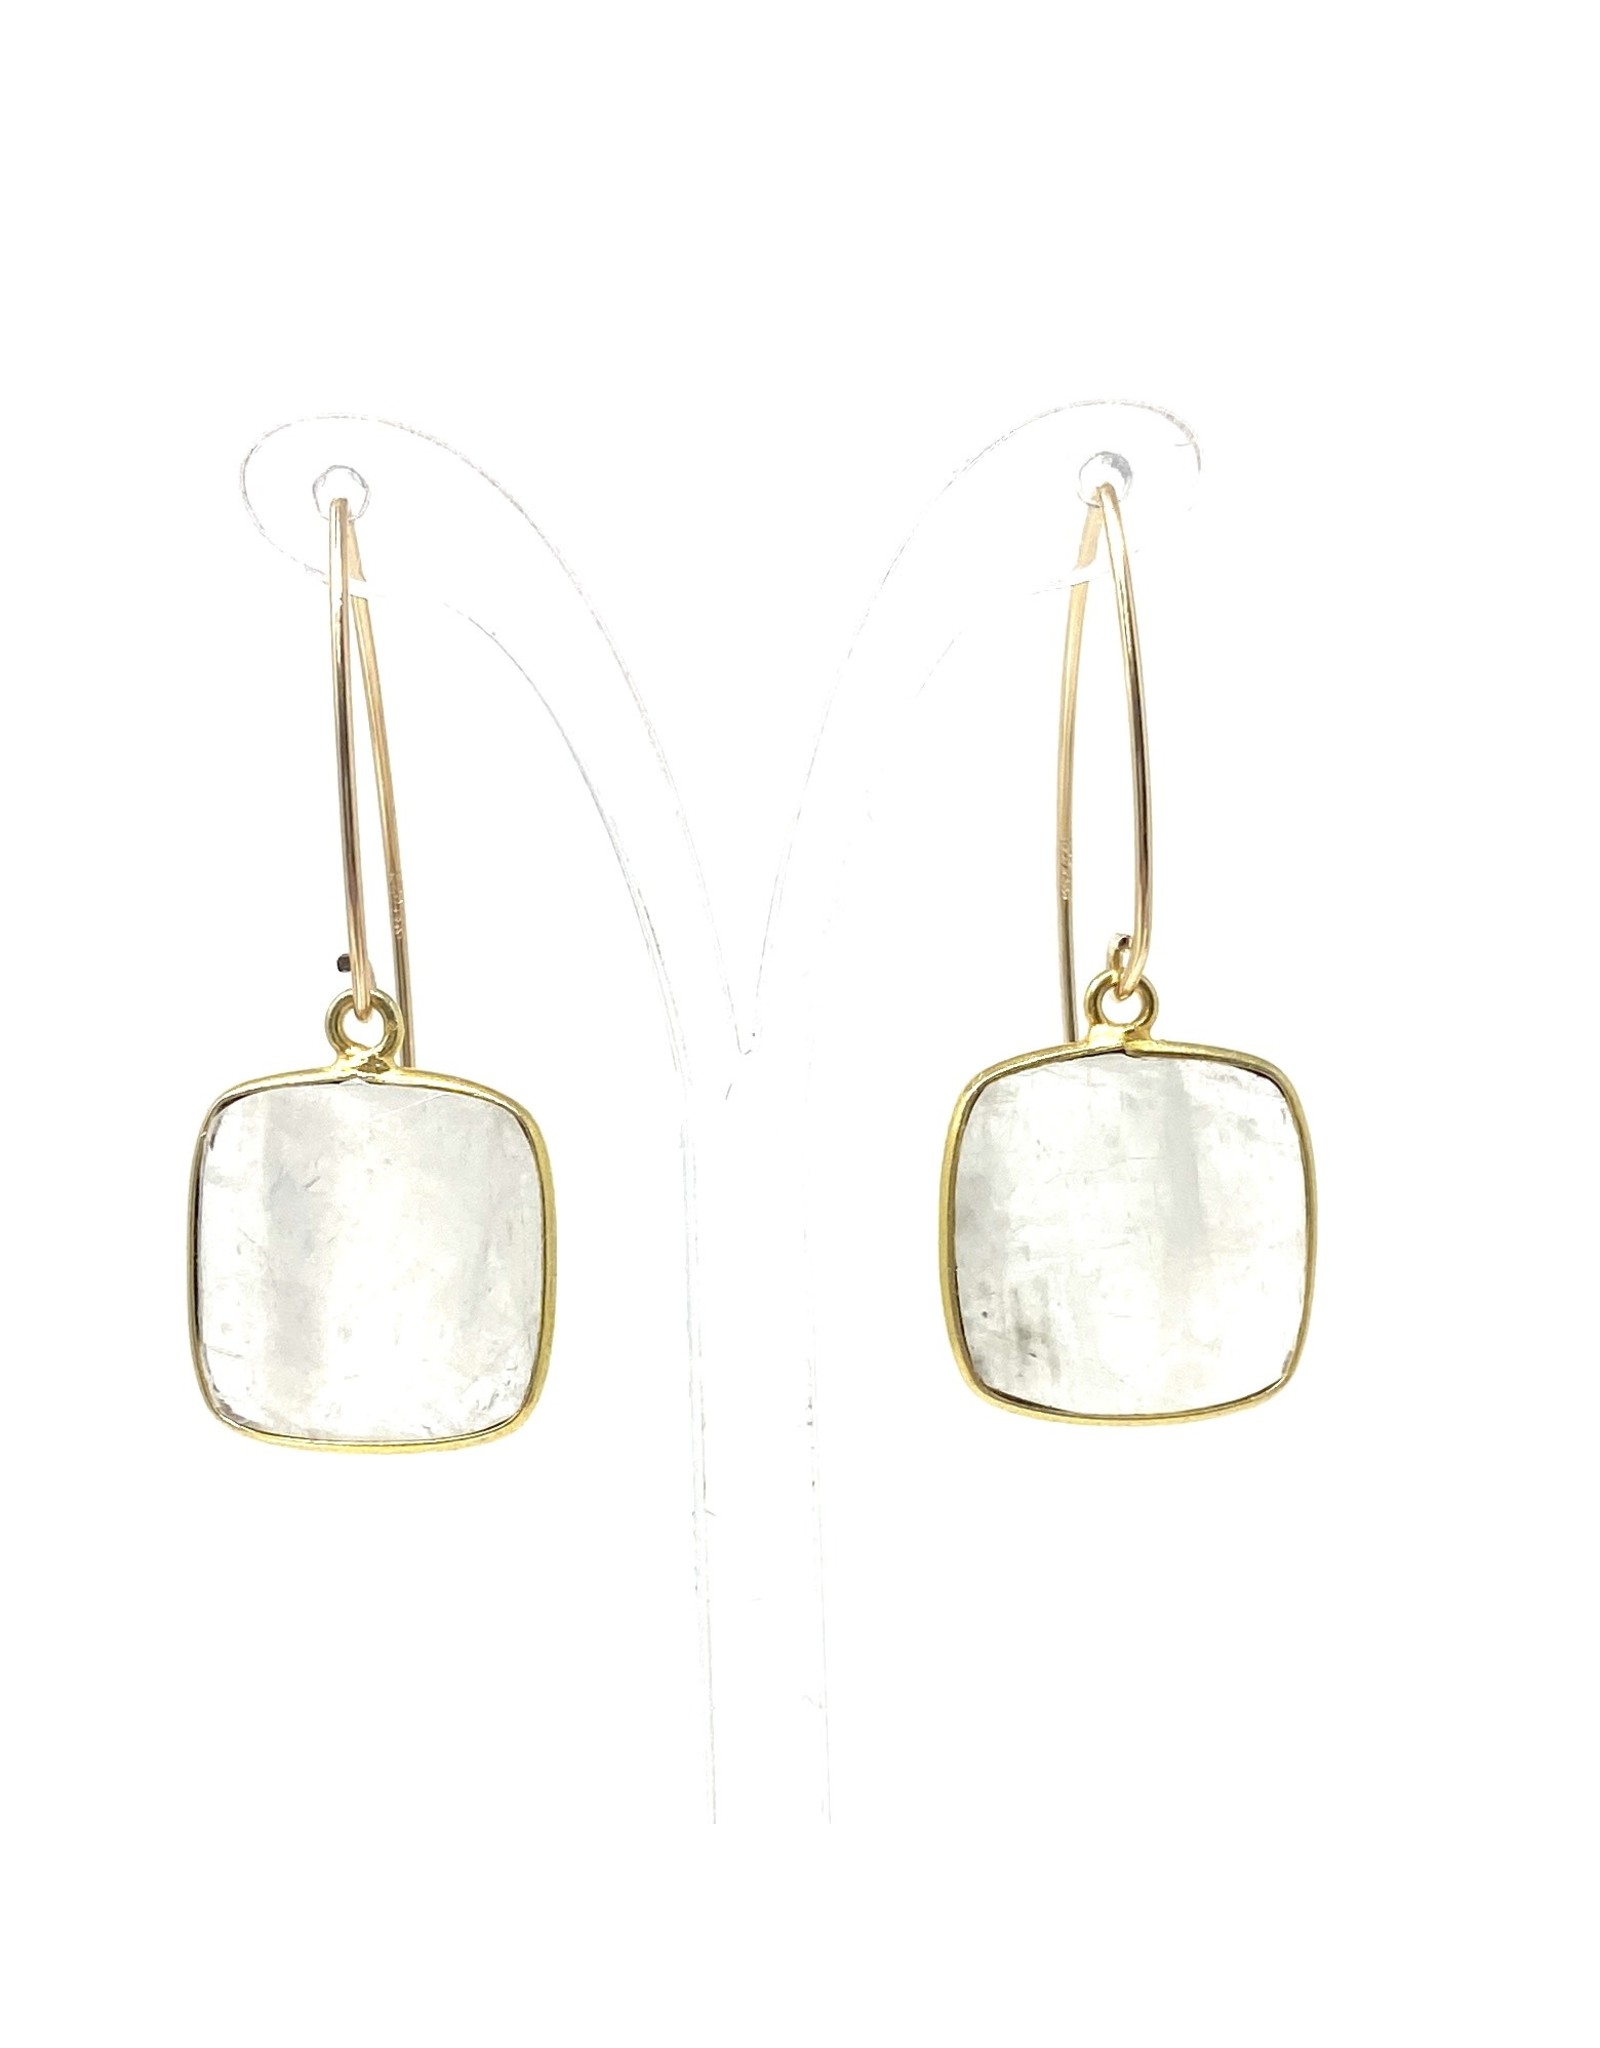 Purity Square Rnbw Moonstone Earrings